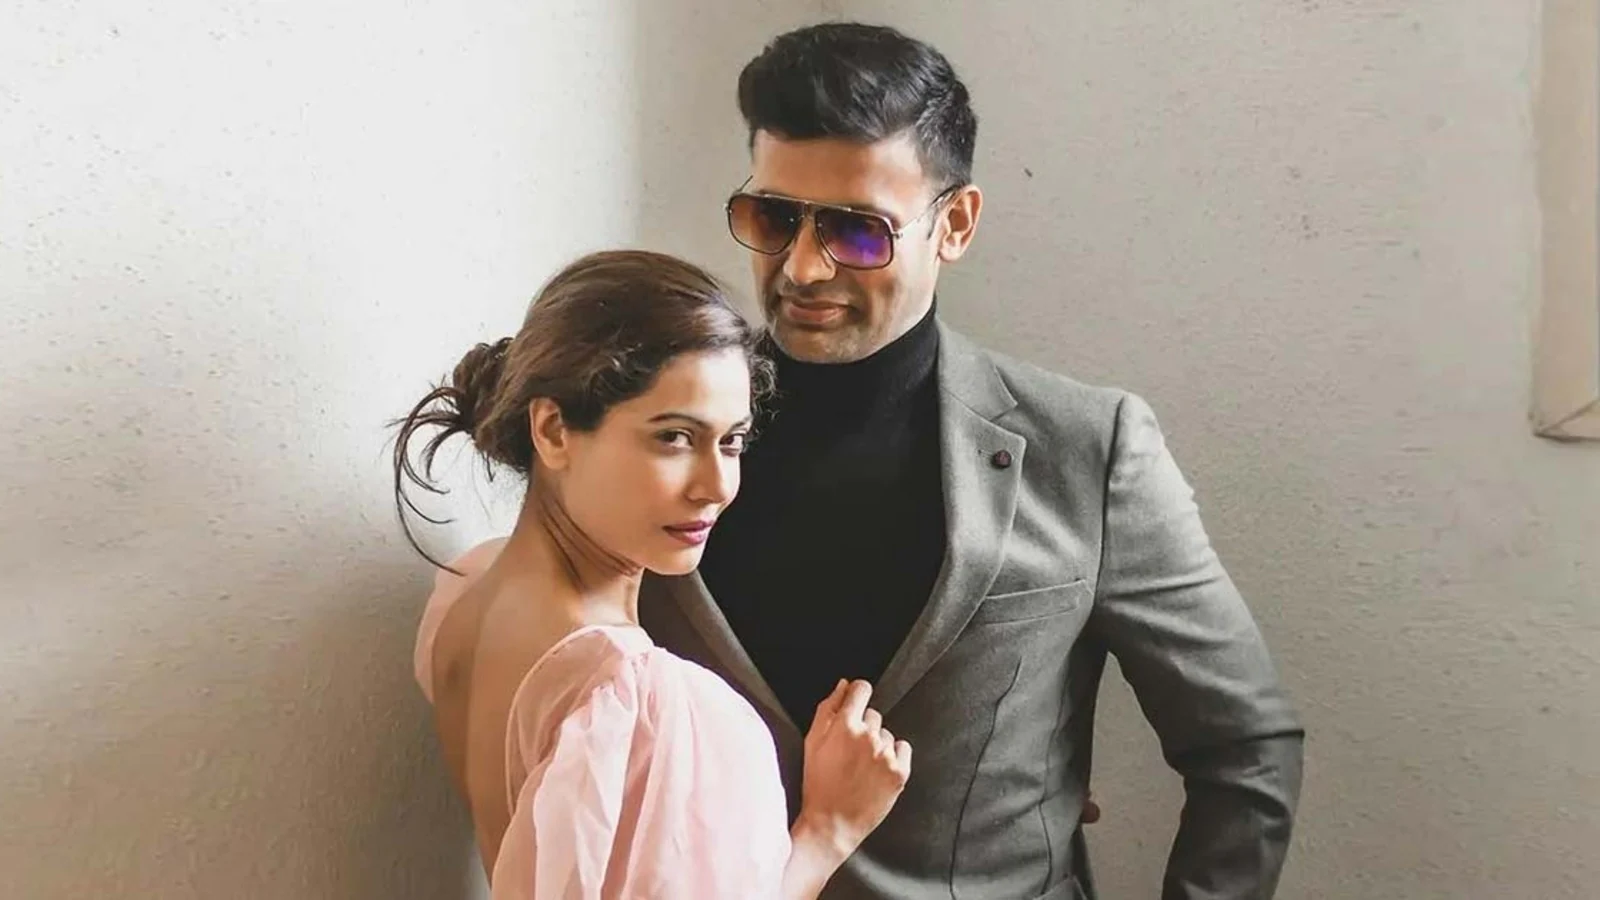 Sangram Singh says he was told Payal Rohatgi was not right for him: ‘There was a Brahmin, who was a fraud…’